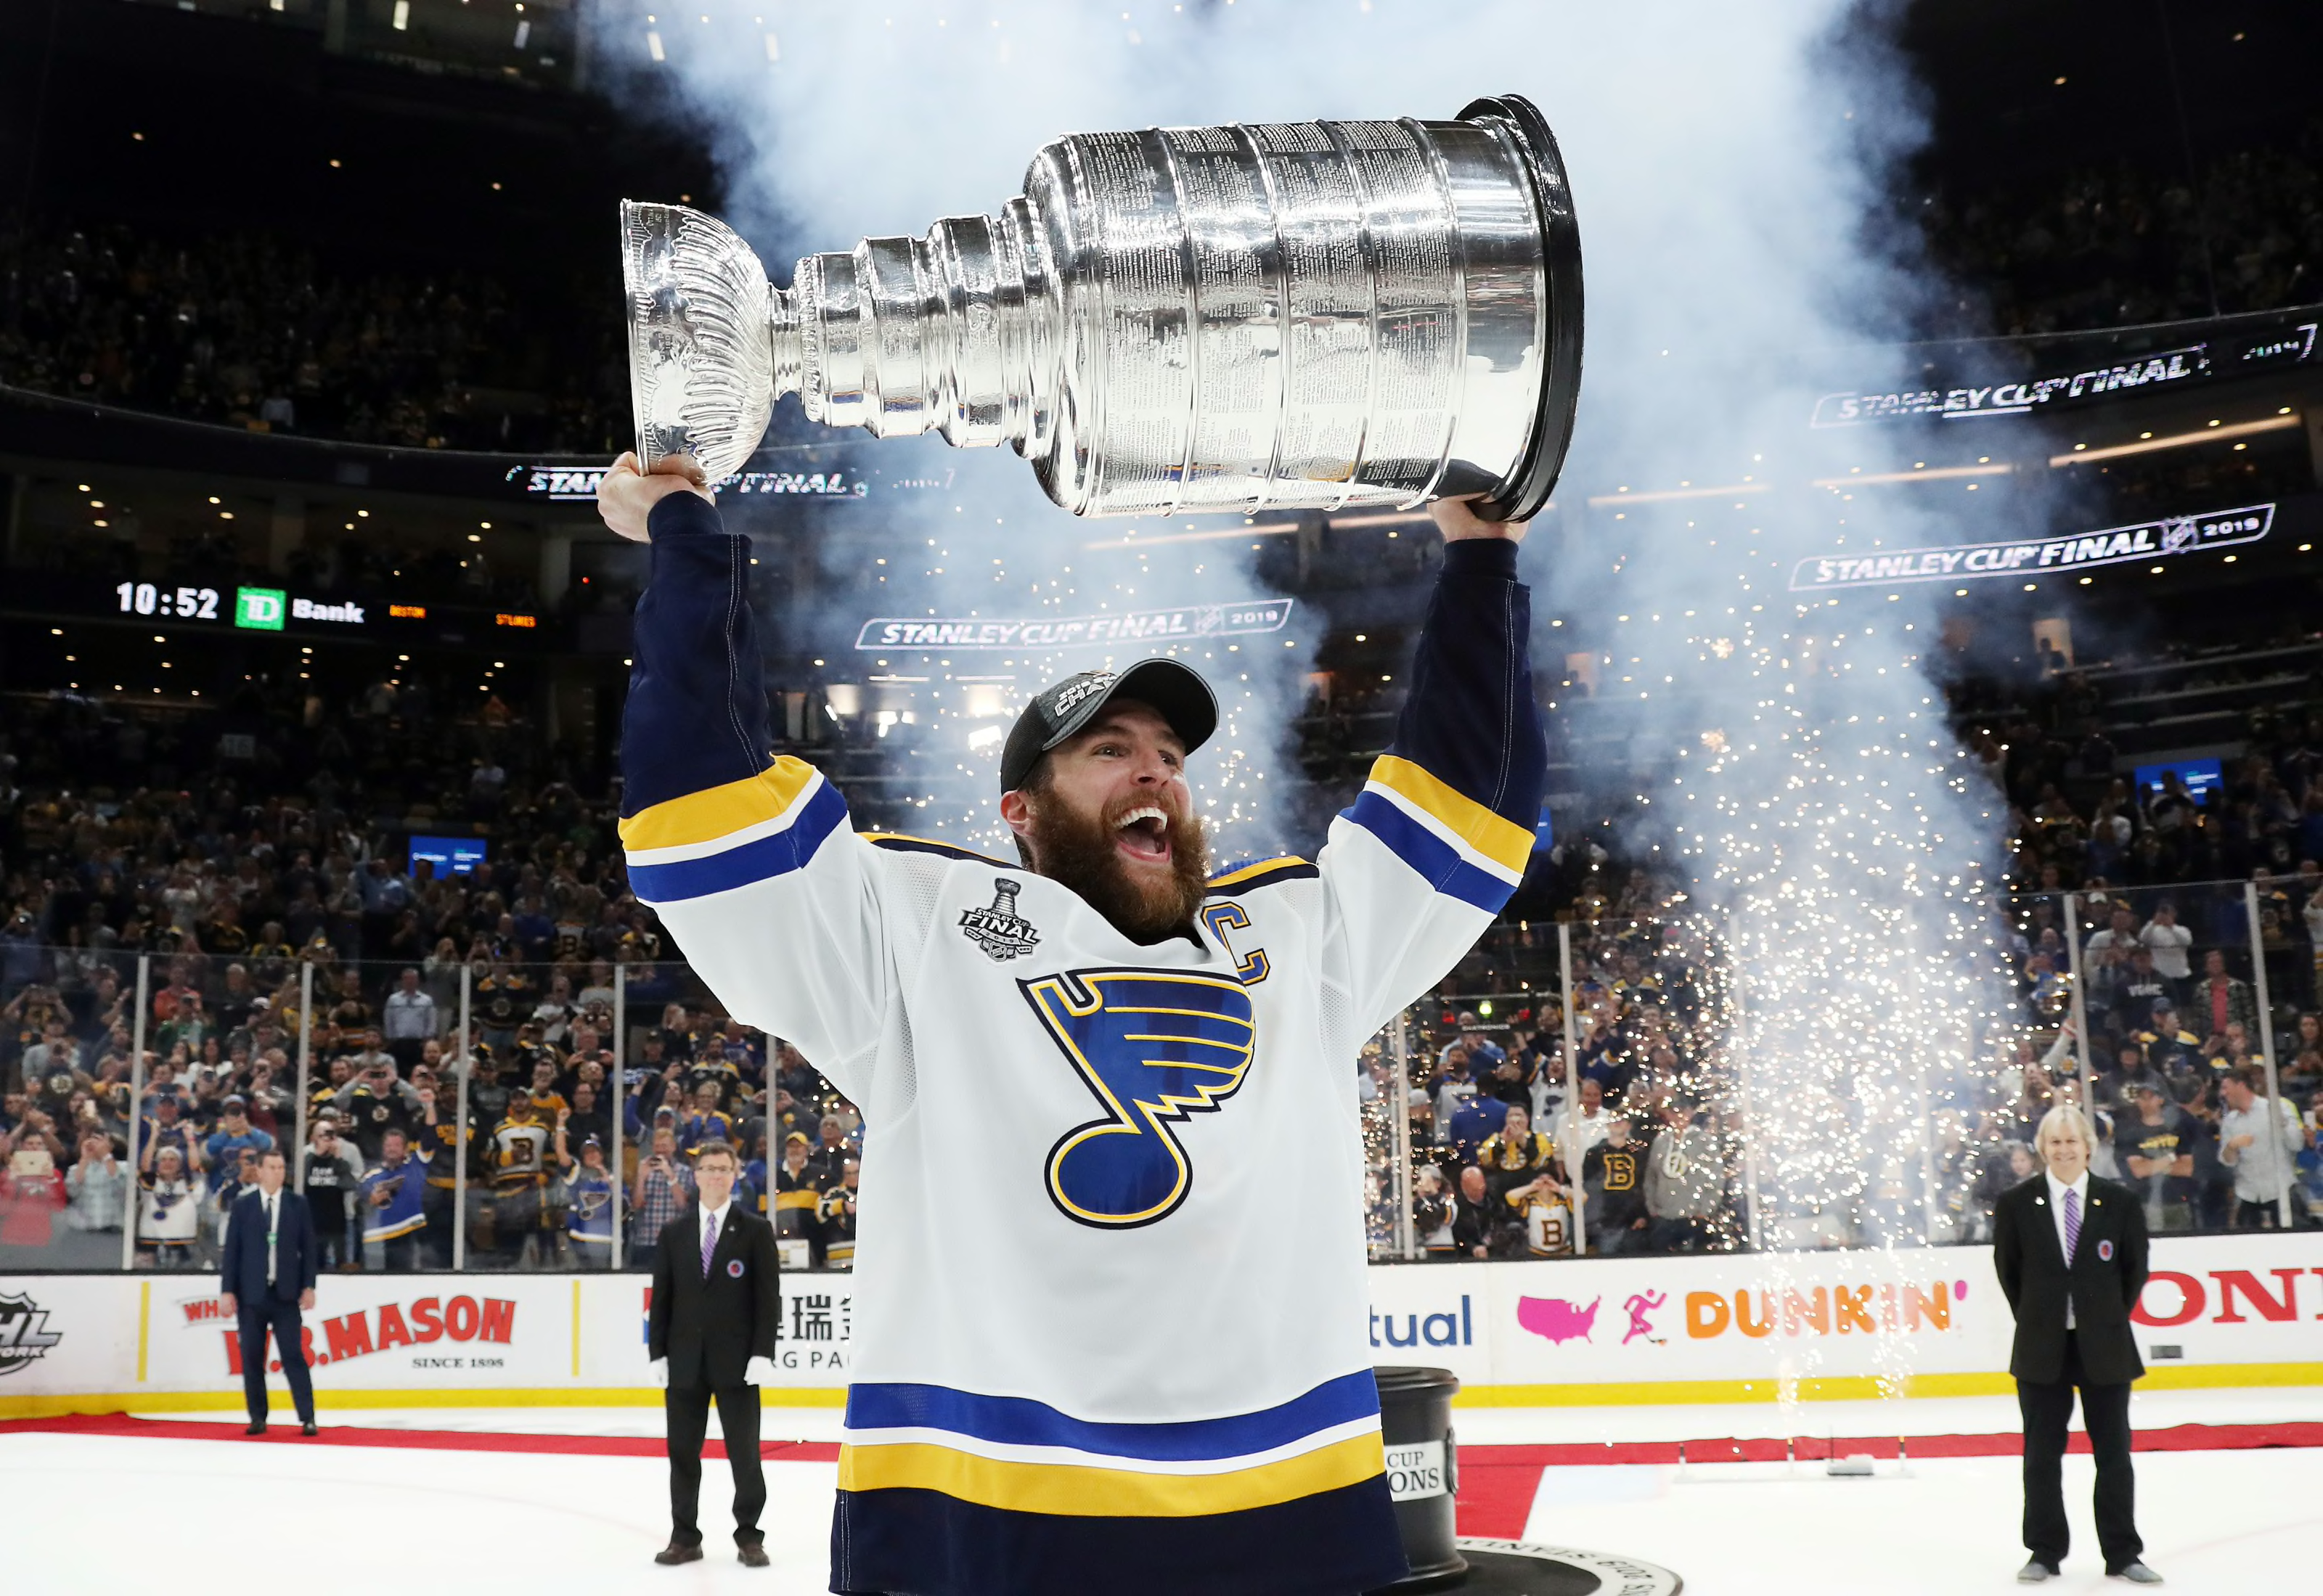 St. Louis, the Blues and the Stanley Cup come together in perfect harmony